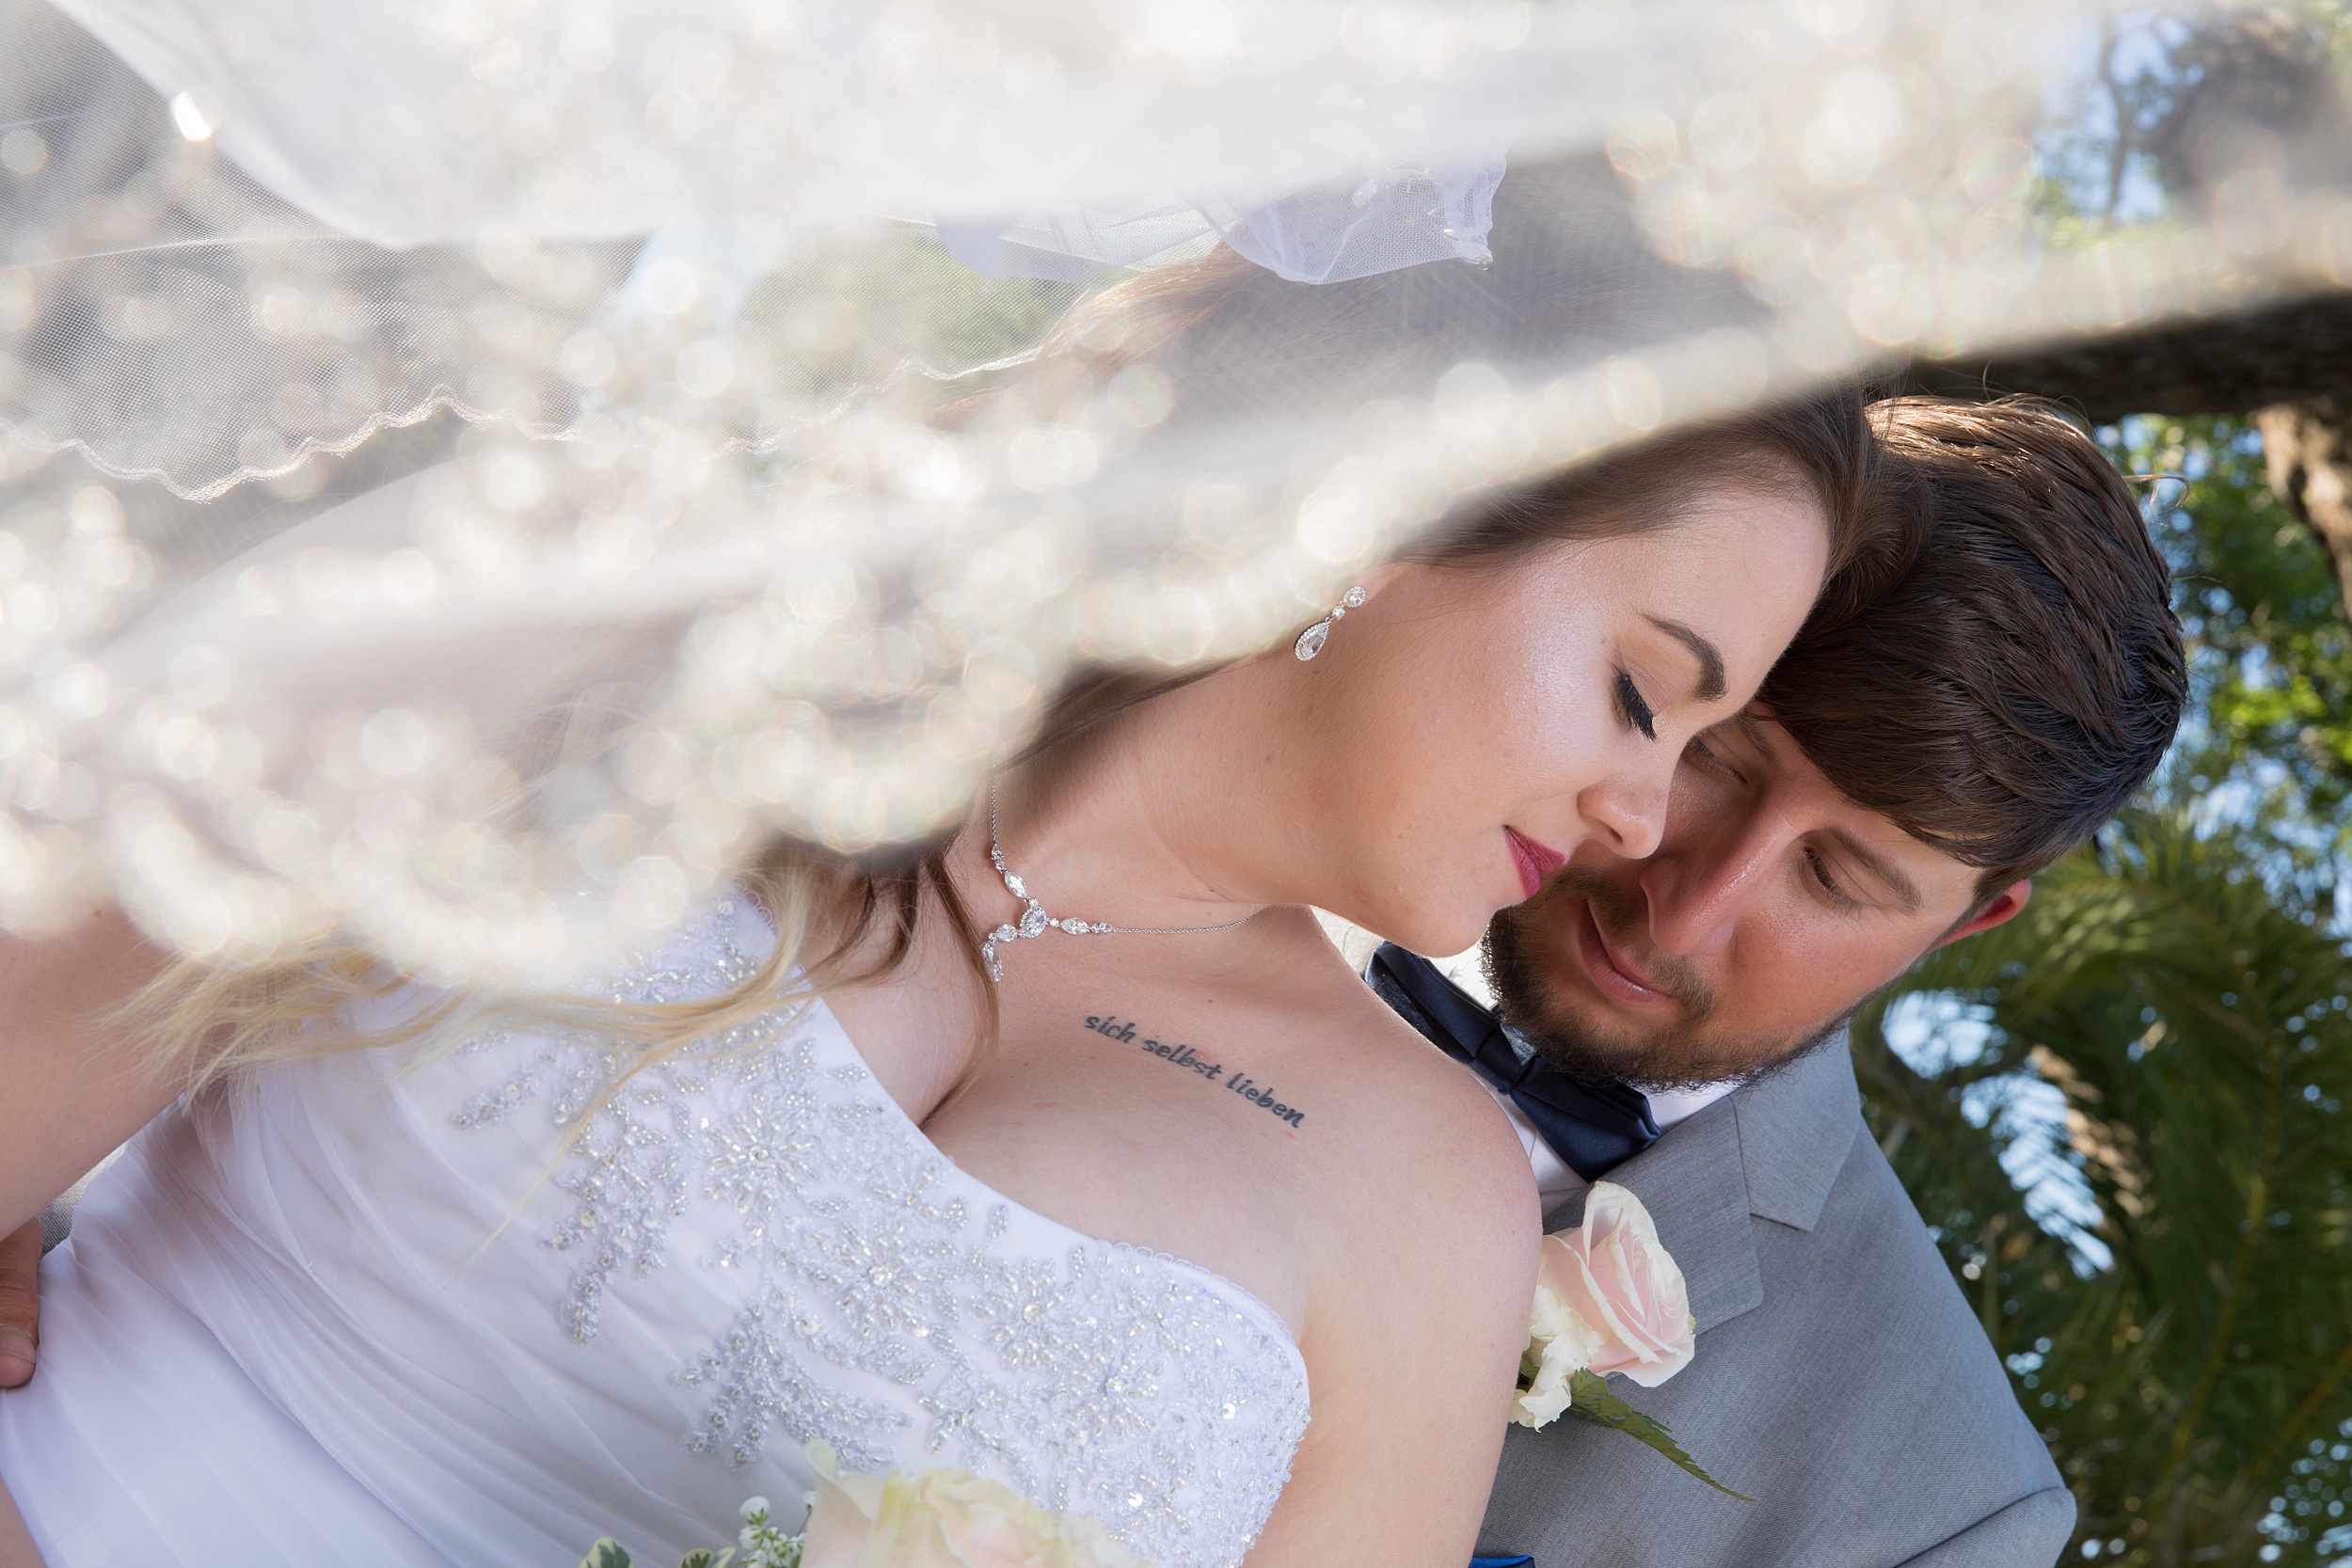 Newlyweds share an intimate moment in a tropical garden while the veil flys around them